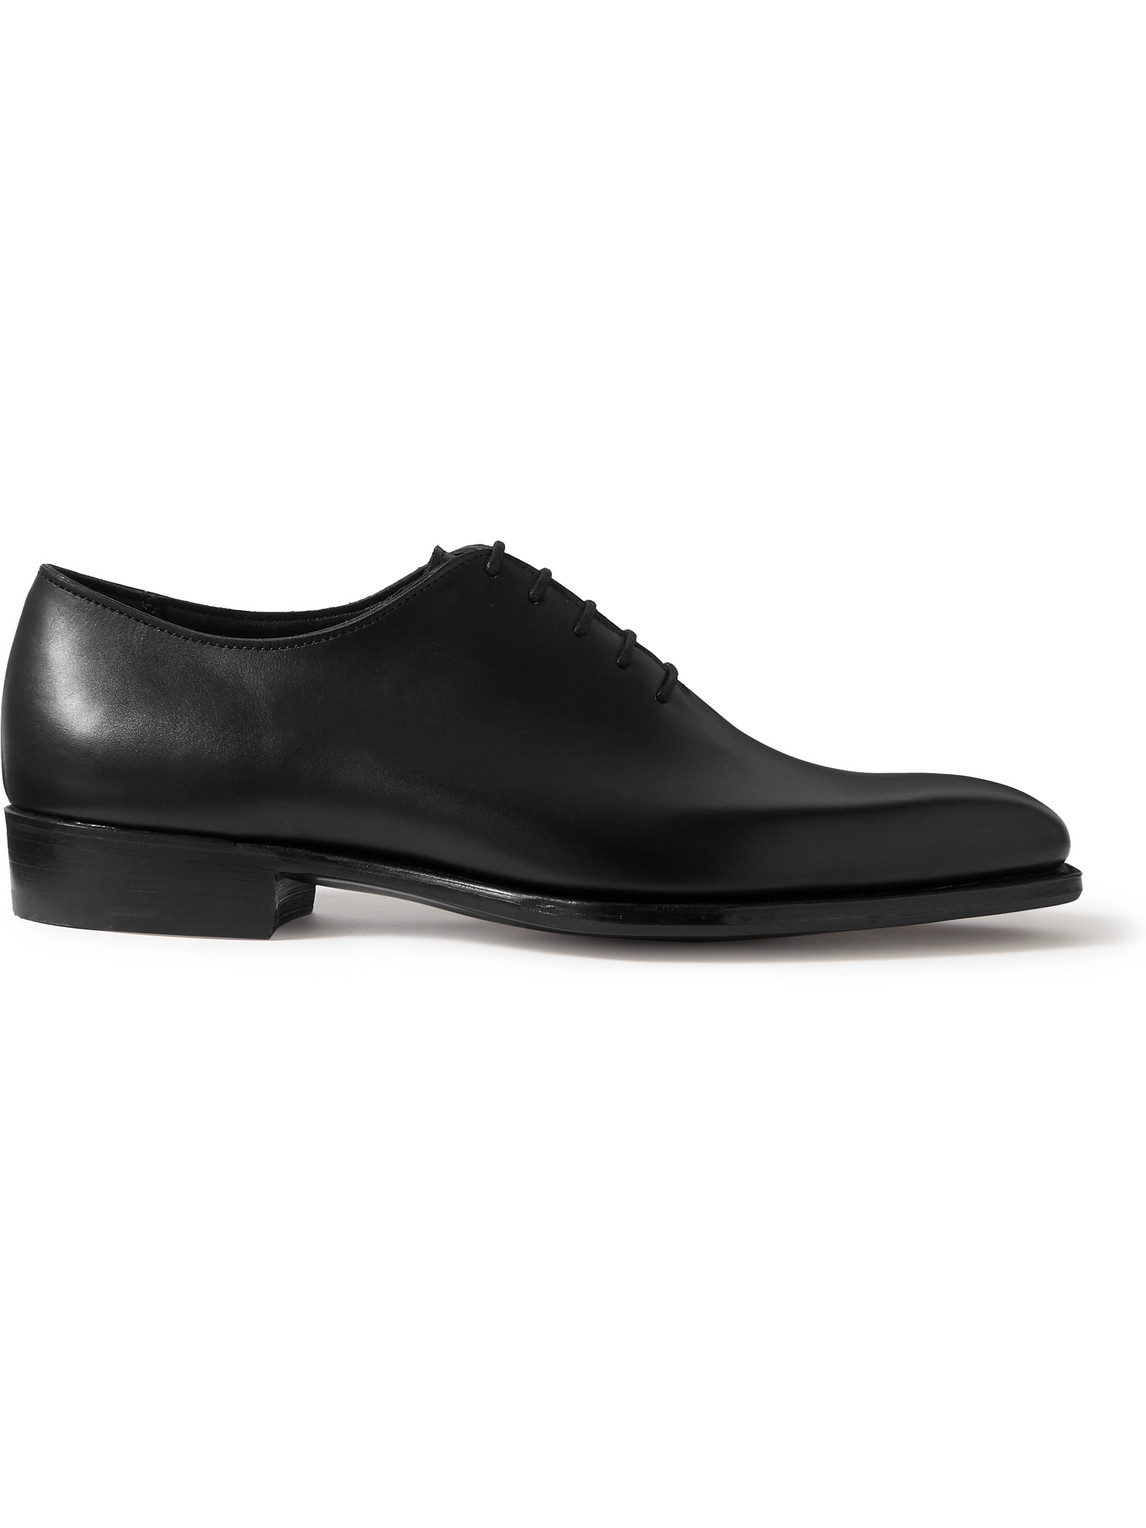 George Cleverley Merlin Leather Oxford Shoes In Black